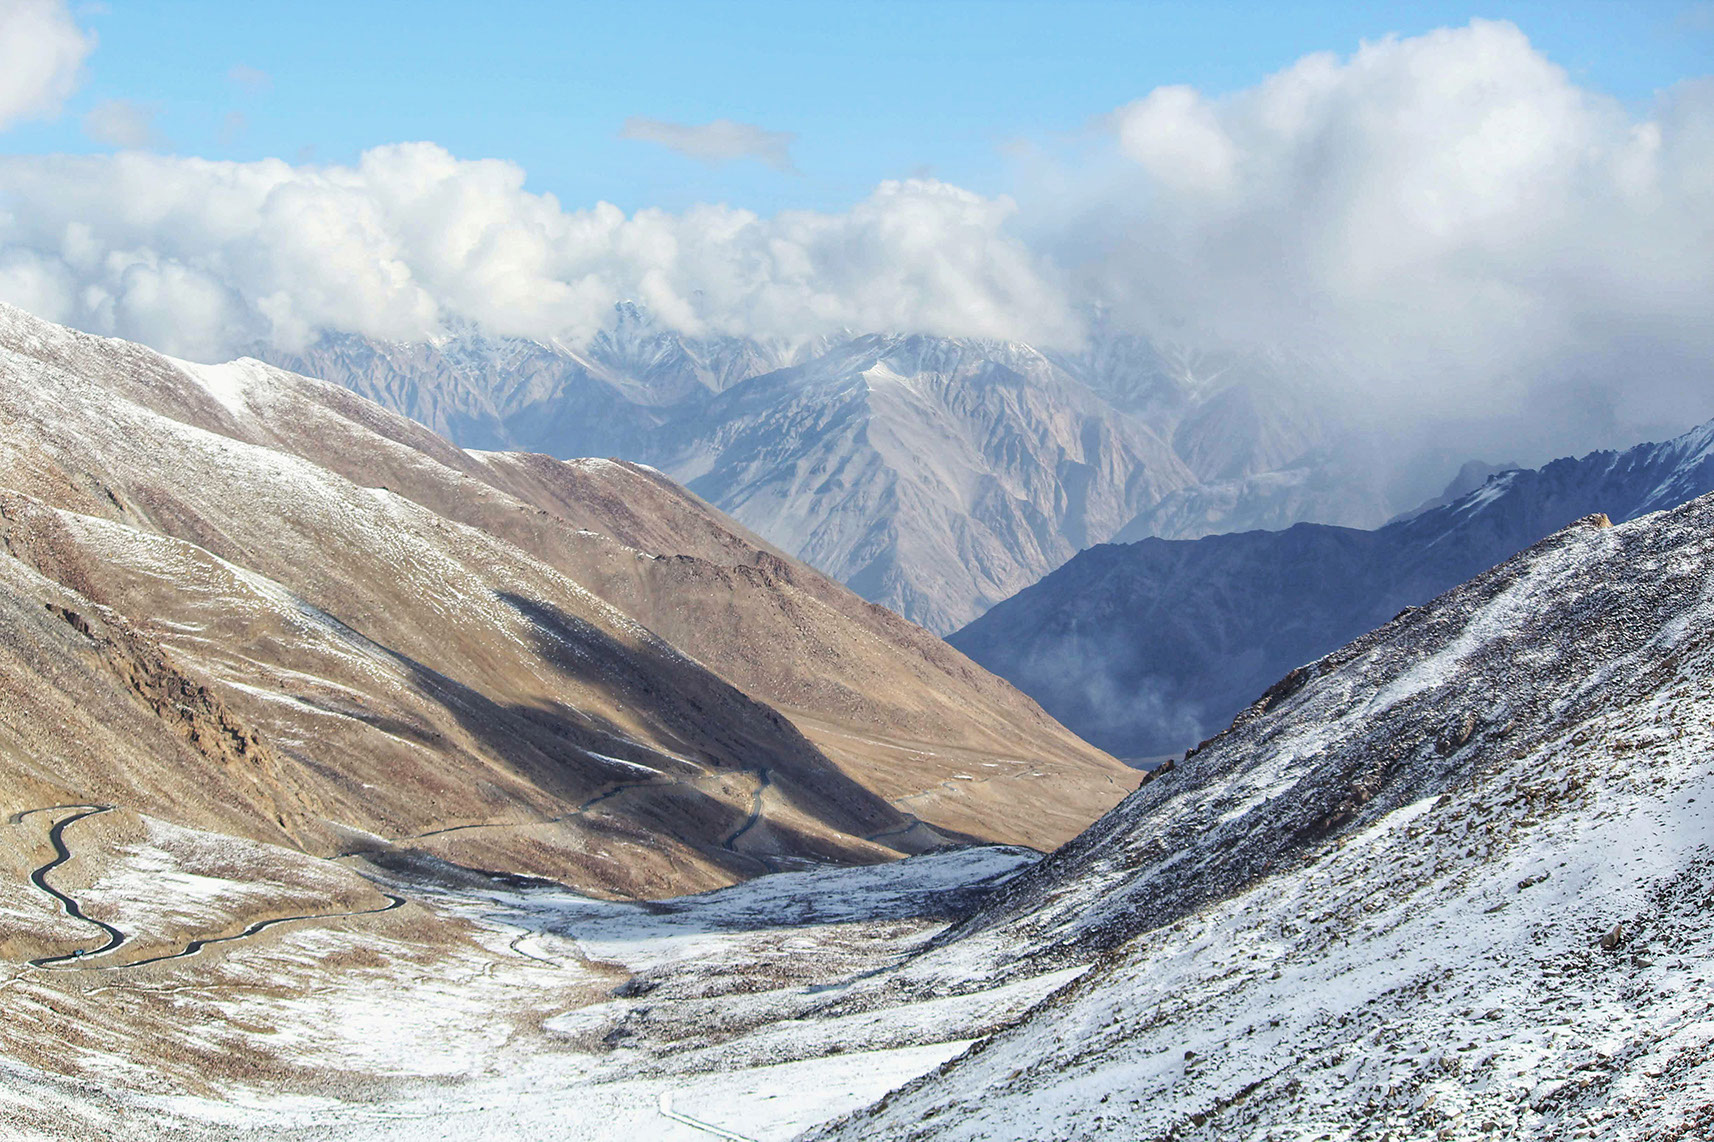 The Nubra Valley is surrounded by snow-capped mountains with Khardung La highway